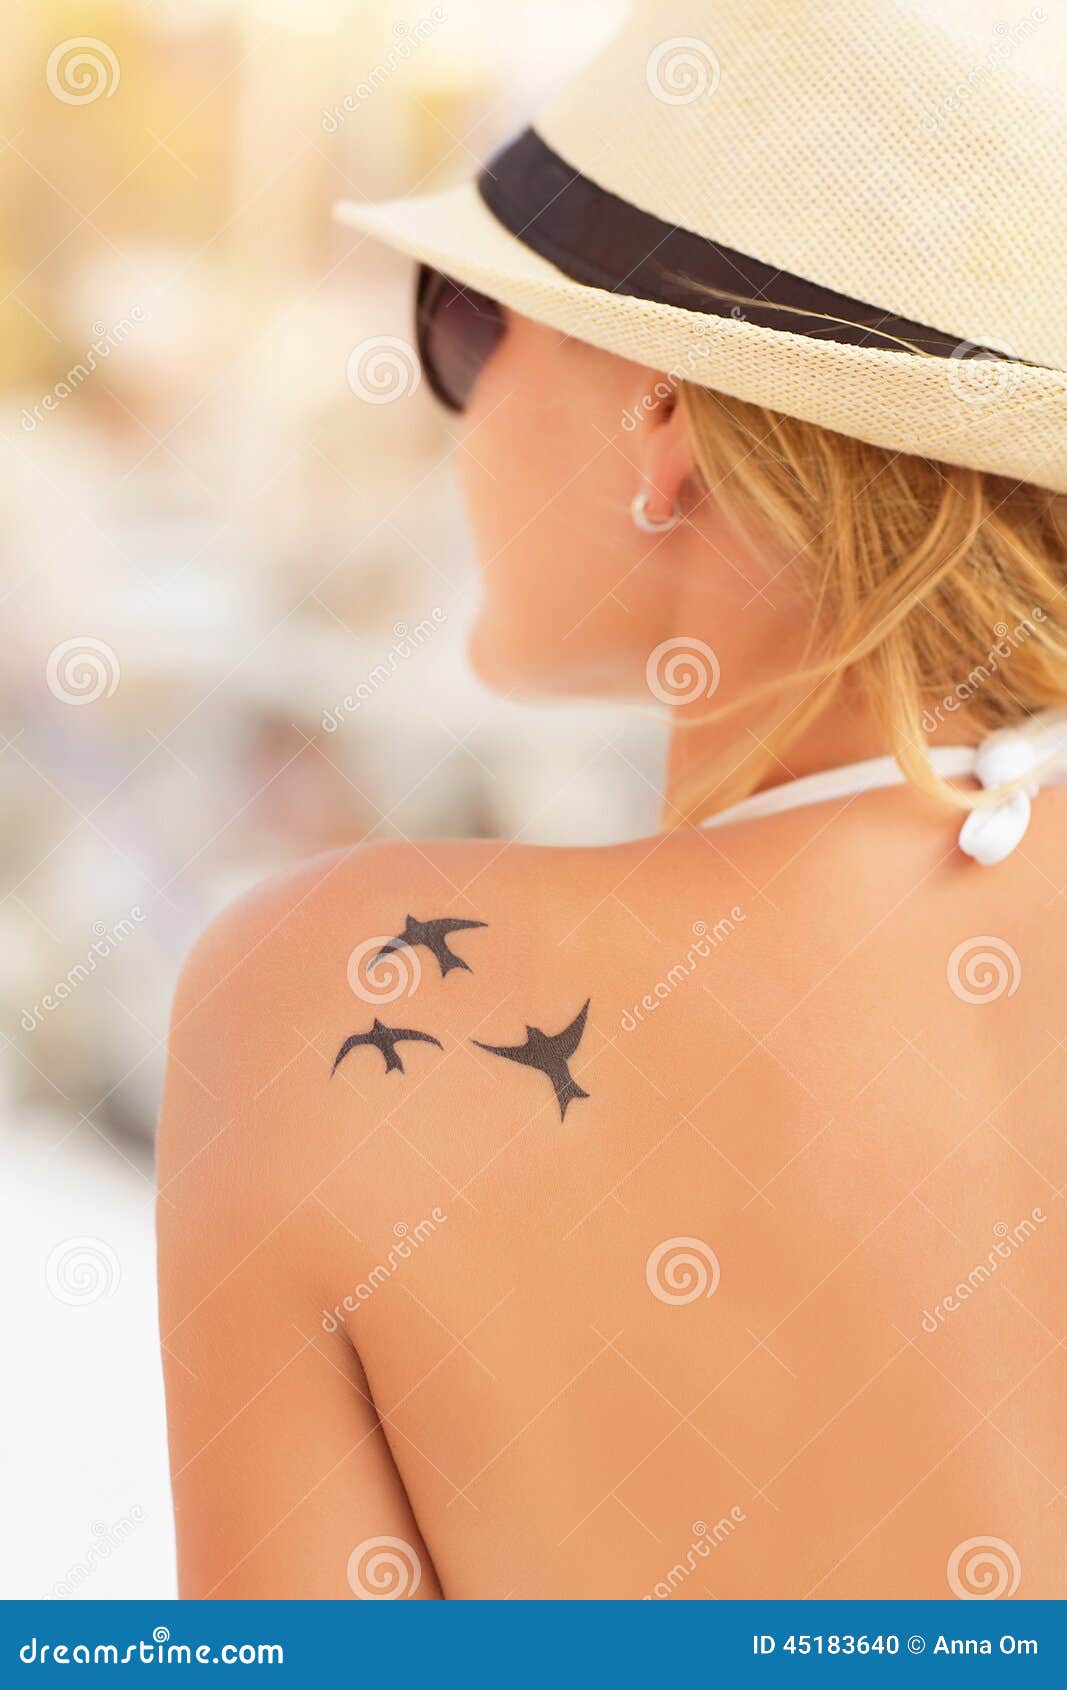 101 Best Womans Body Tattoo Ideas That Will Blow Your Mind!